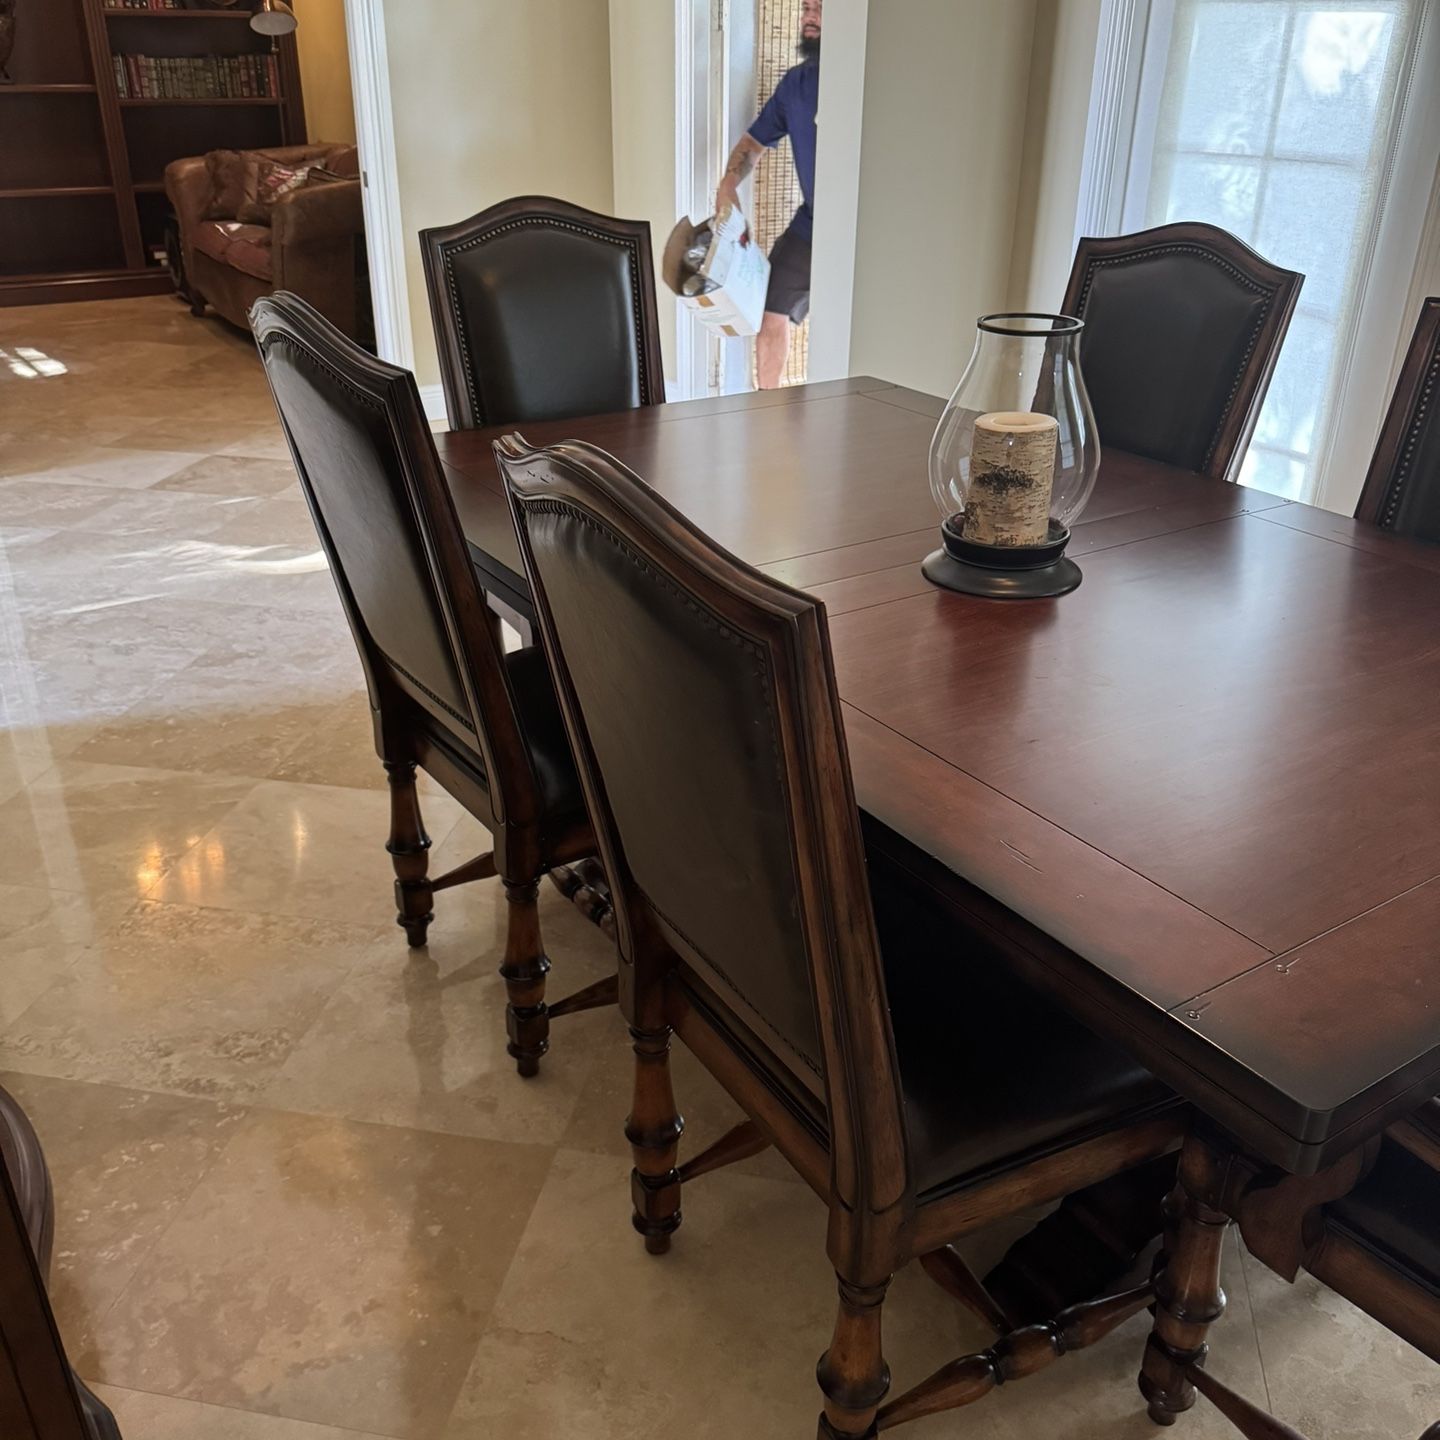 Beautiful Dining Room Table W/leaf / Sideboard/ 6 Chairs - Originally $4800.    Asking $1350